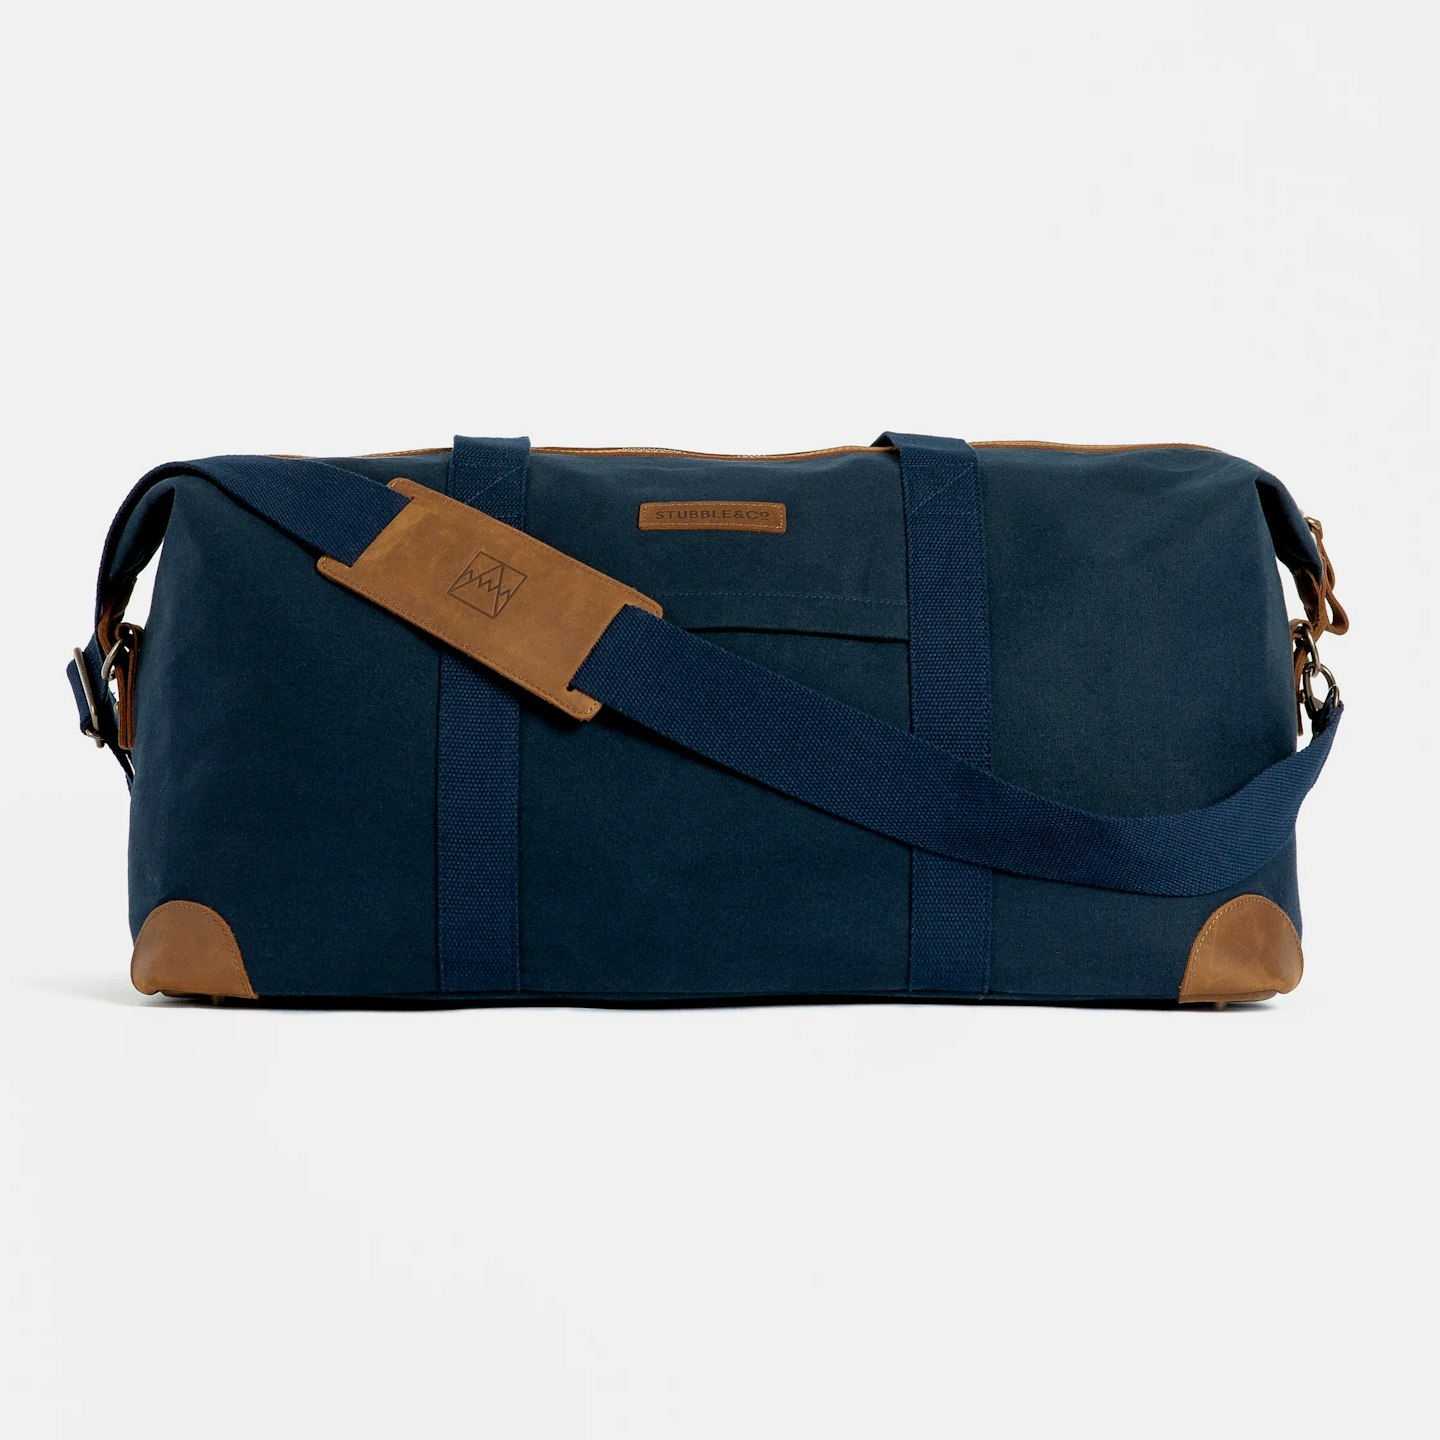 Stubble and Co. The Weekender